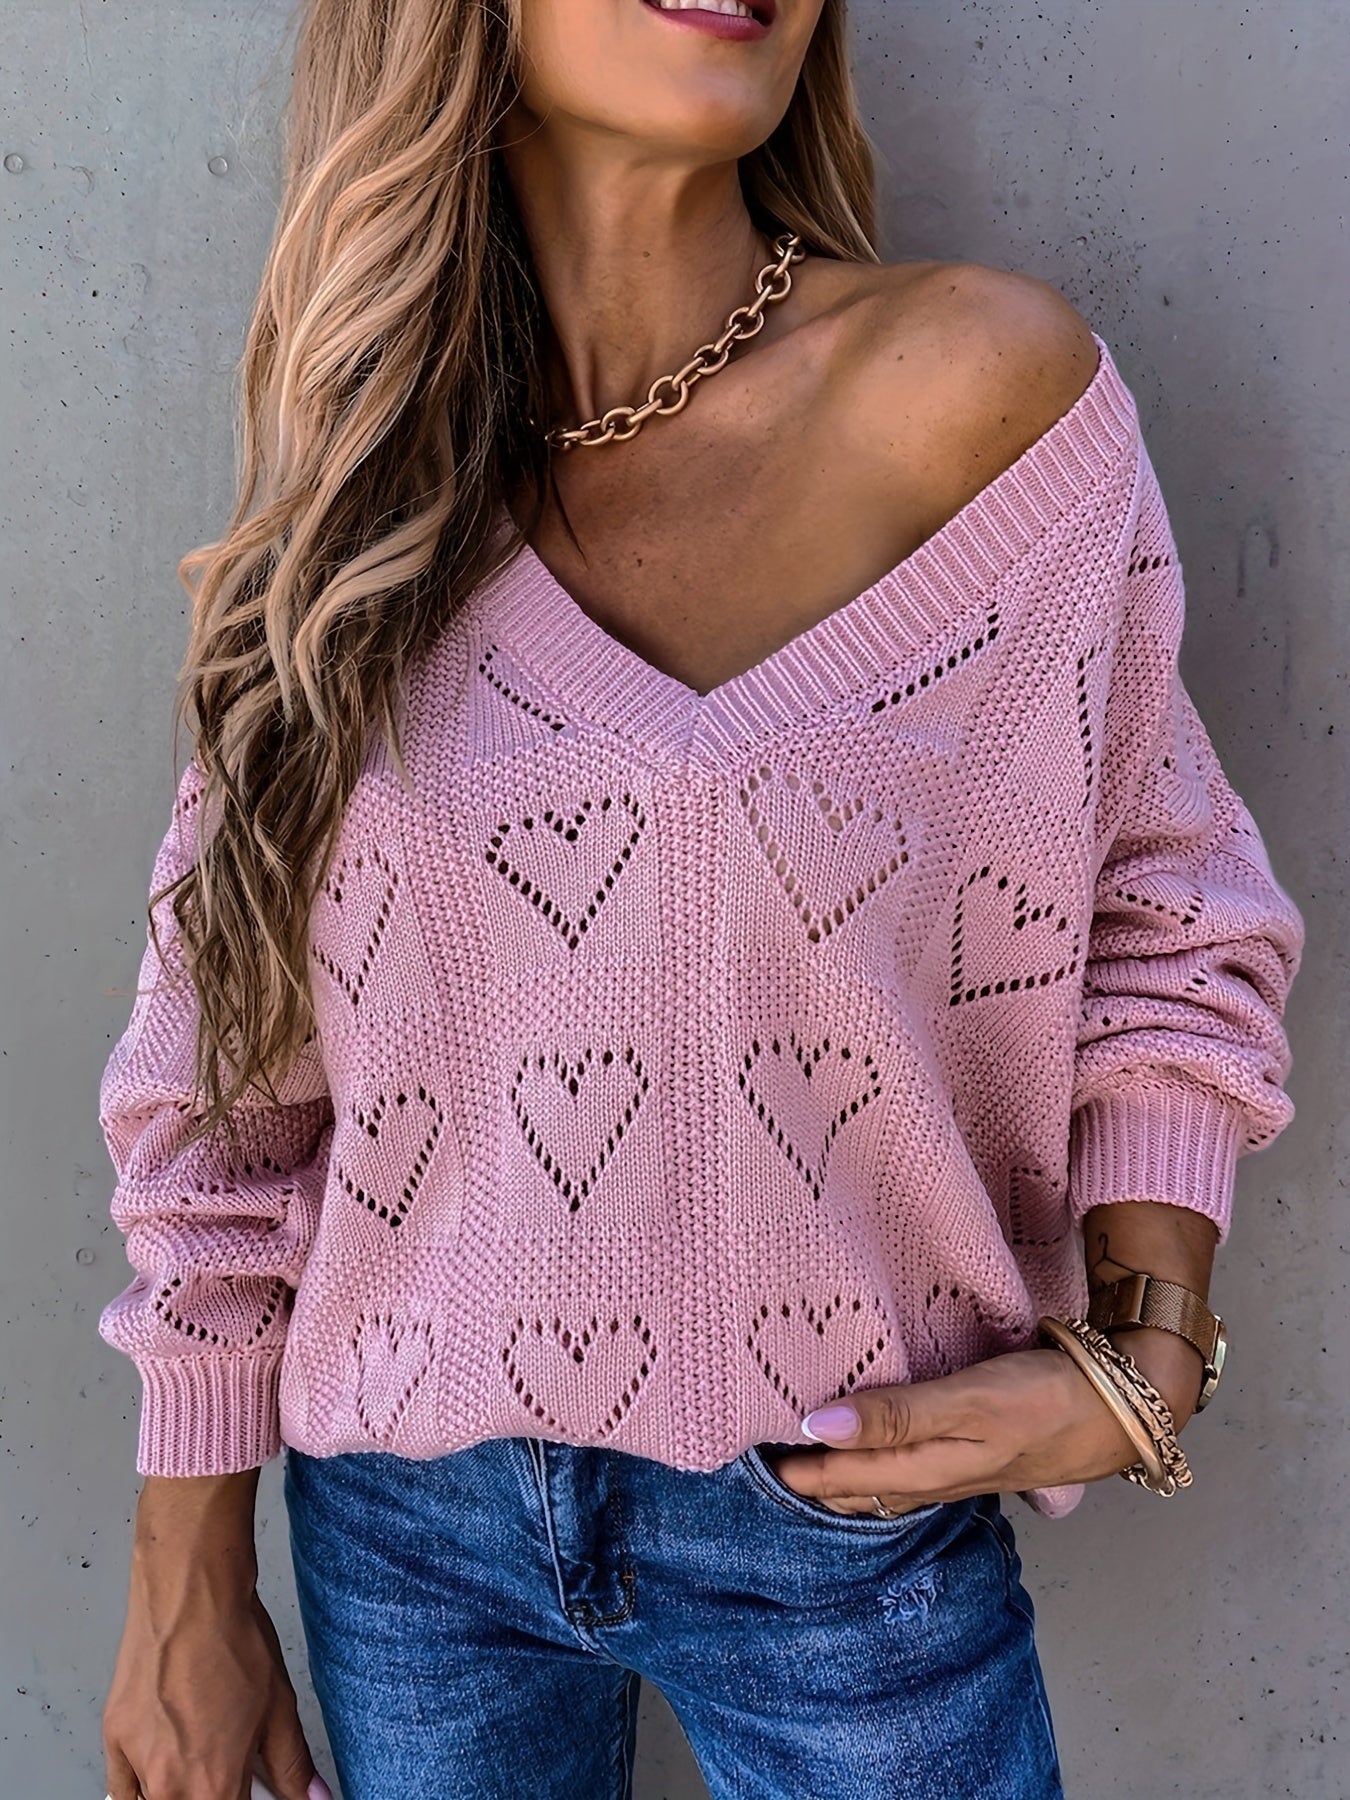 Antmvs Heart Pattern Cut Out V Neck Sweater, Casual Long Sleeve Sweater For Fall & Winter, Women's Clothing